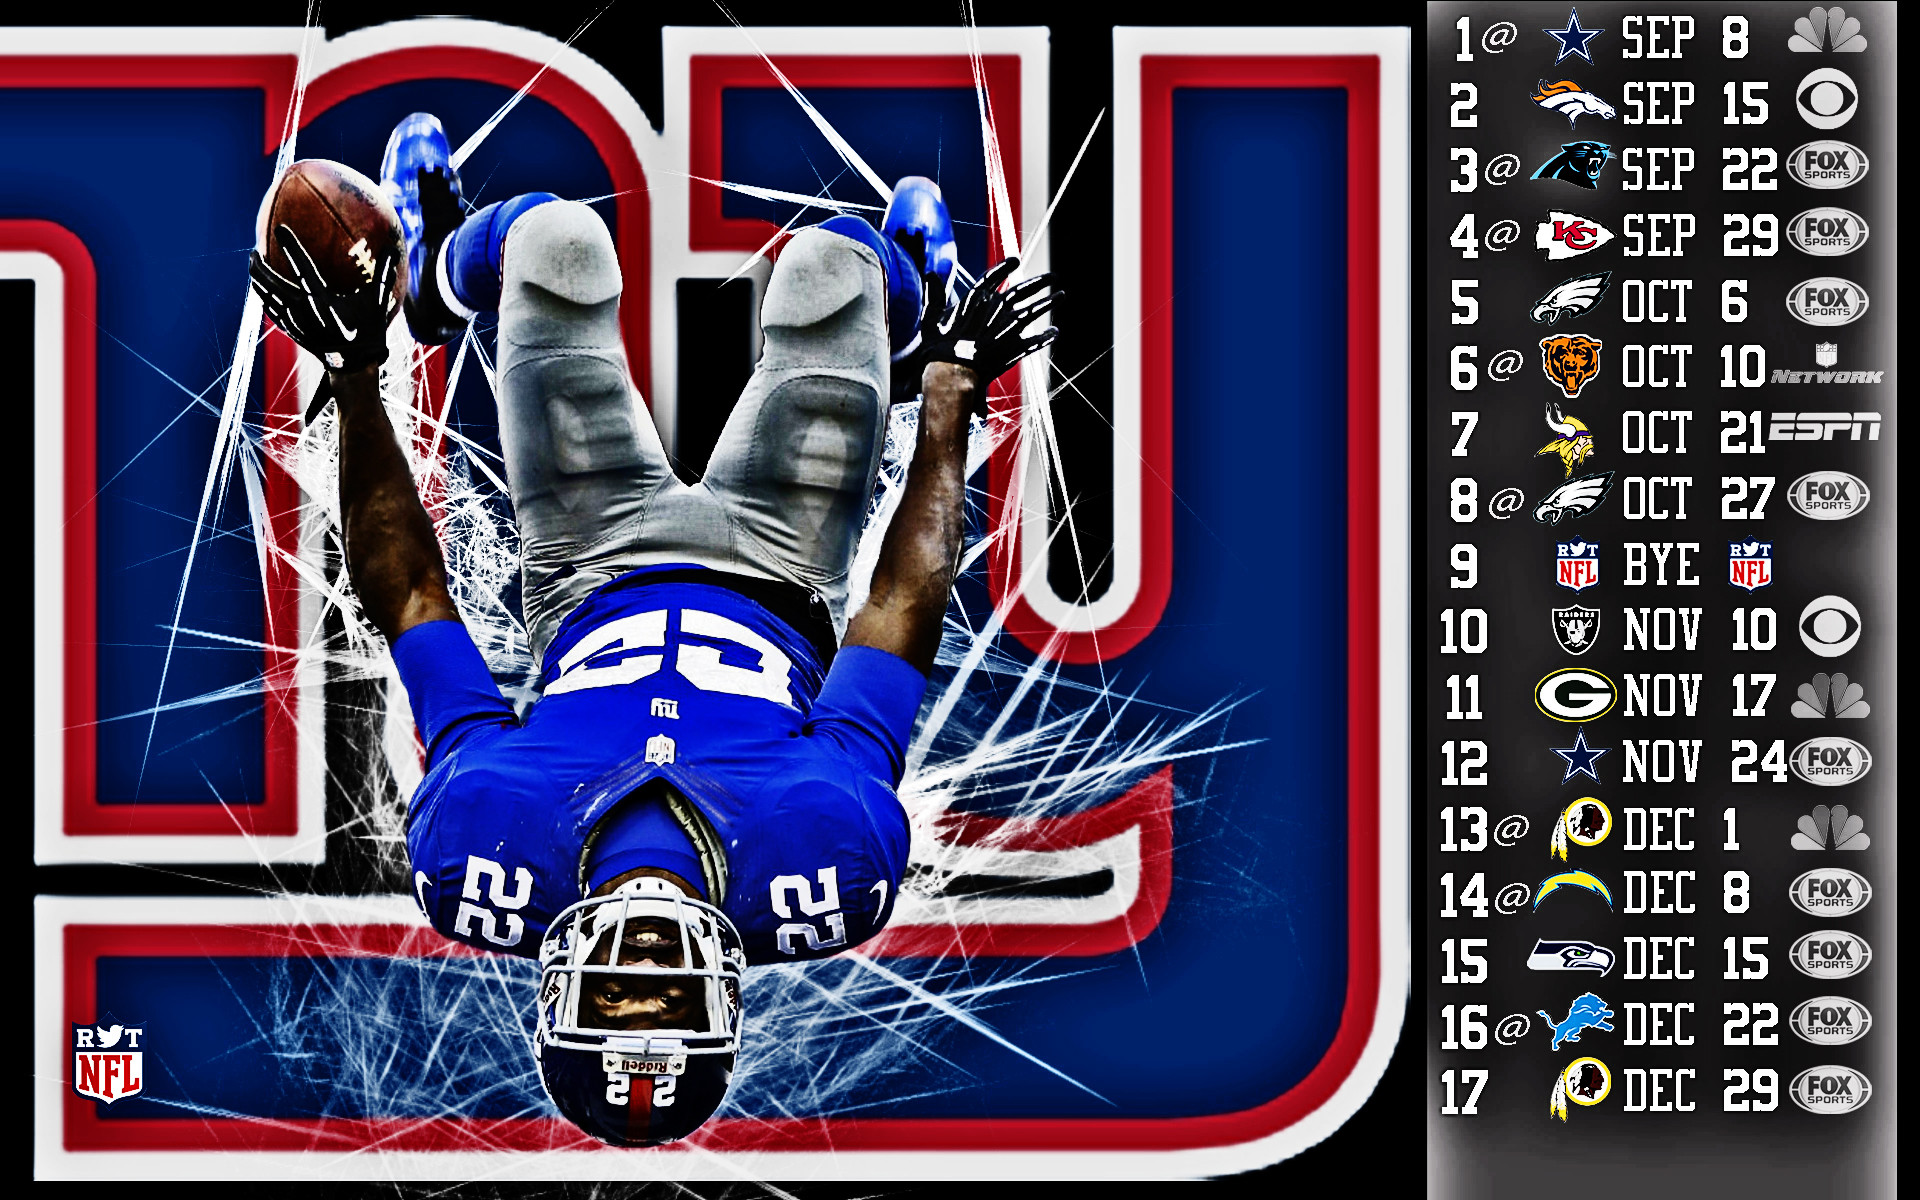 1920x1200 2013 Giants Schedule Wallpapers [Archive] - New York Giants Fan Forum |  Free Wallpapers | Pinterest | Giants schedule and Wallpaper